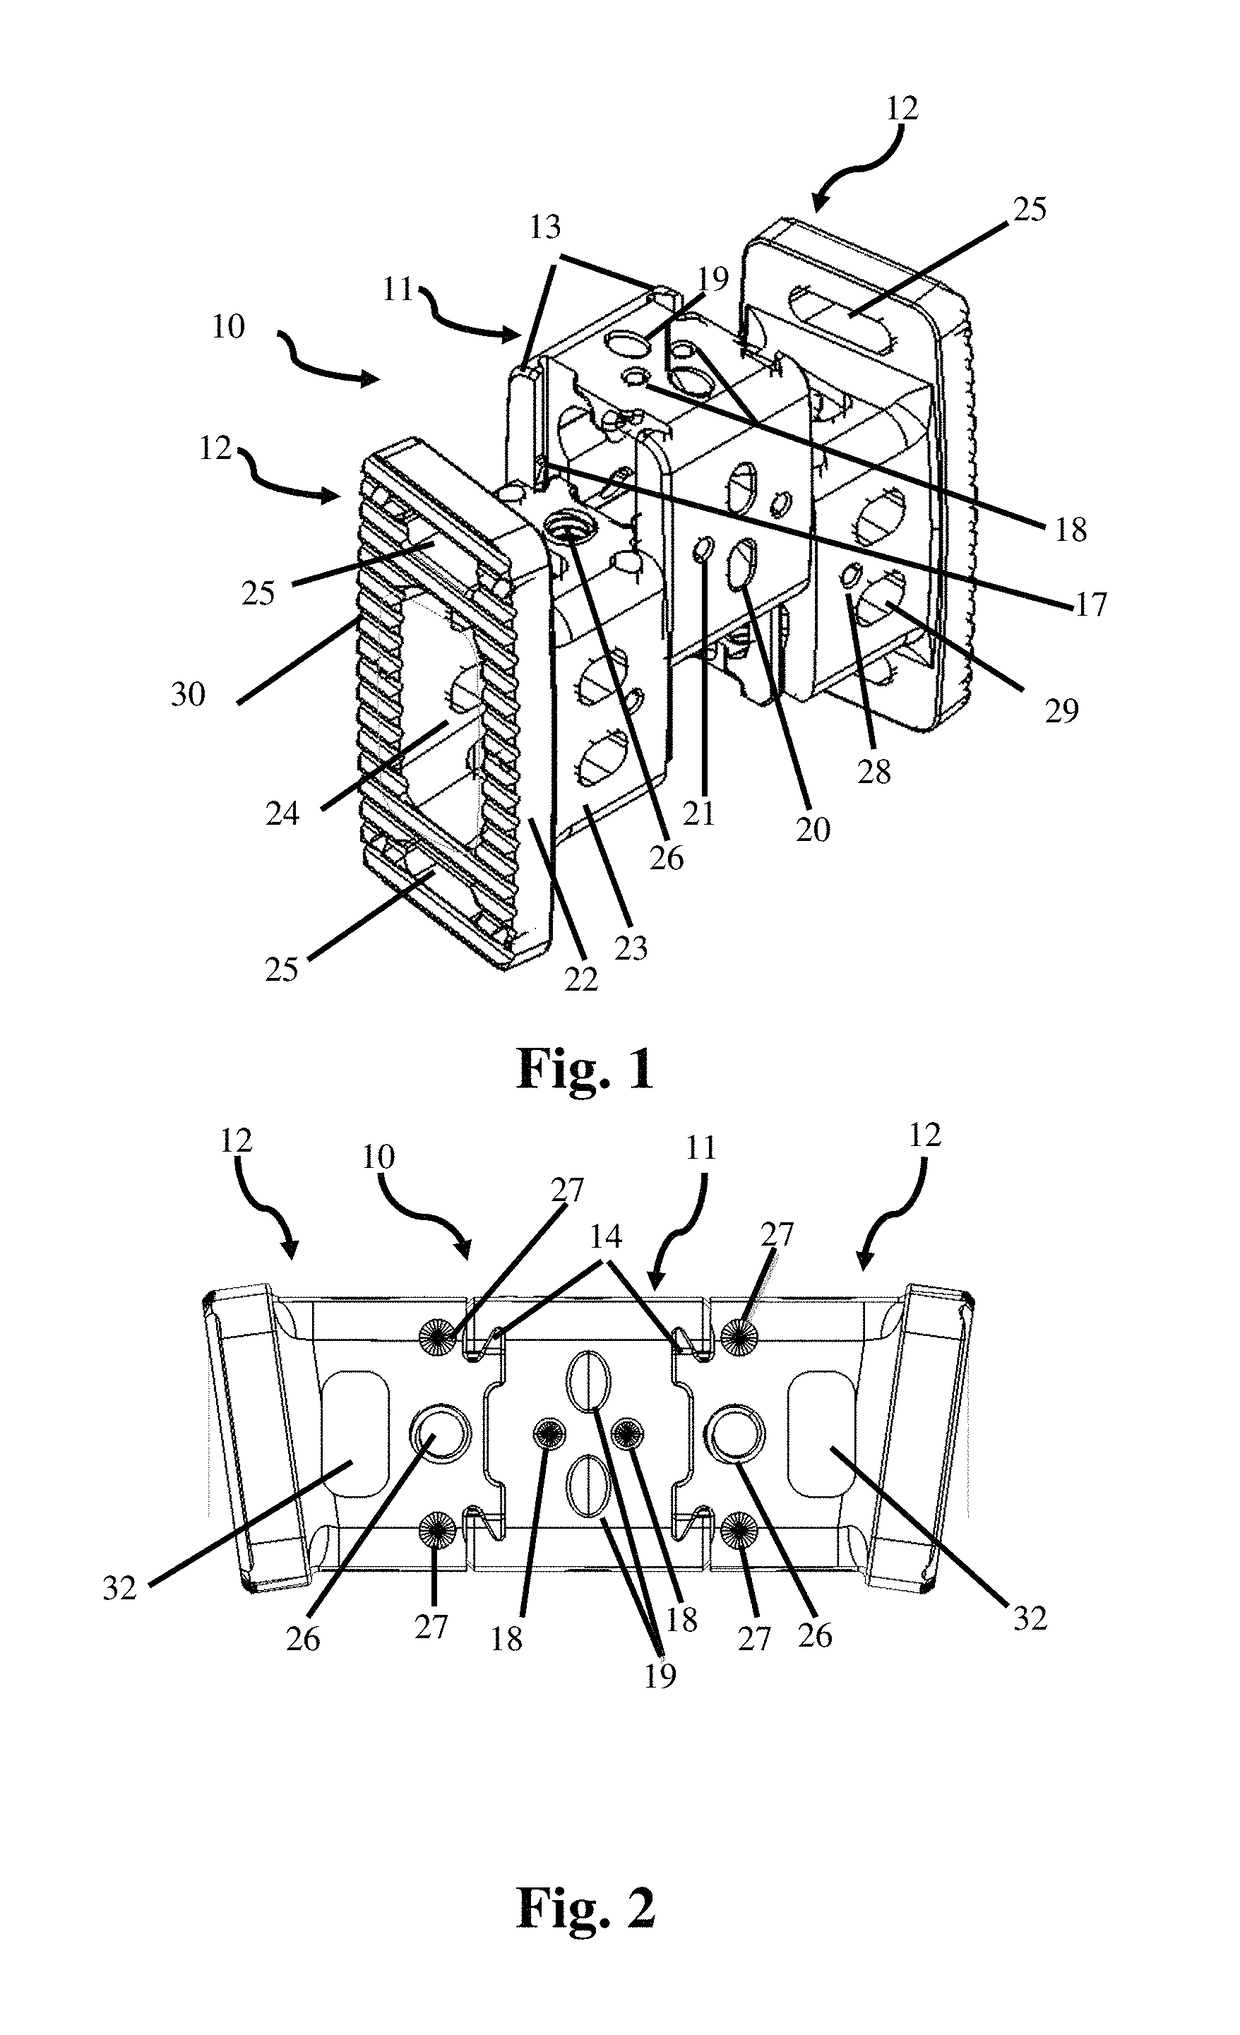 Vertebral body replacement and insertion methods